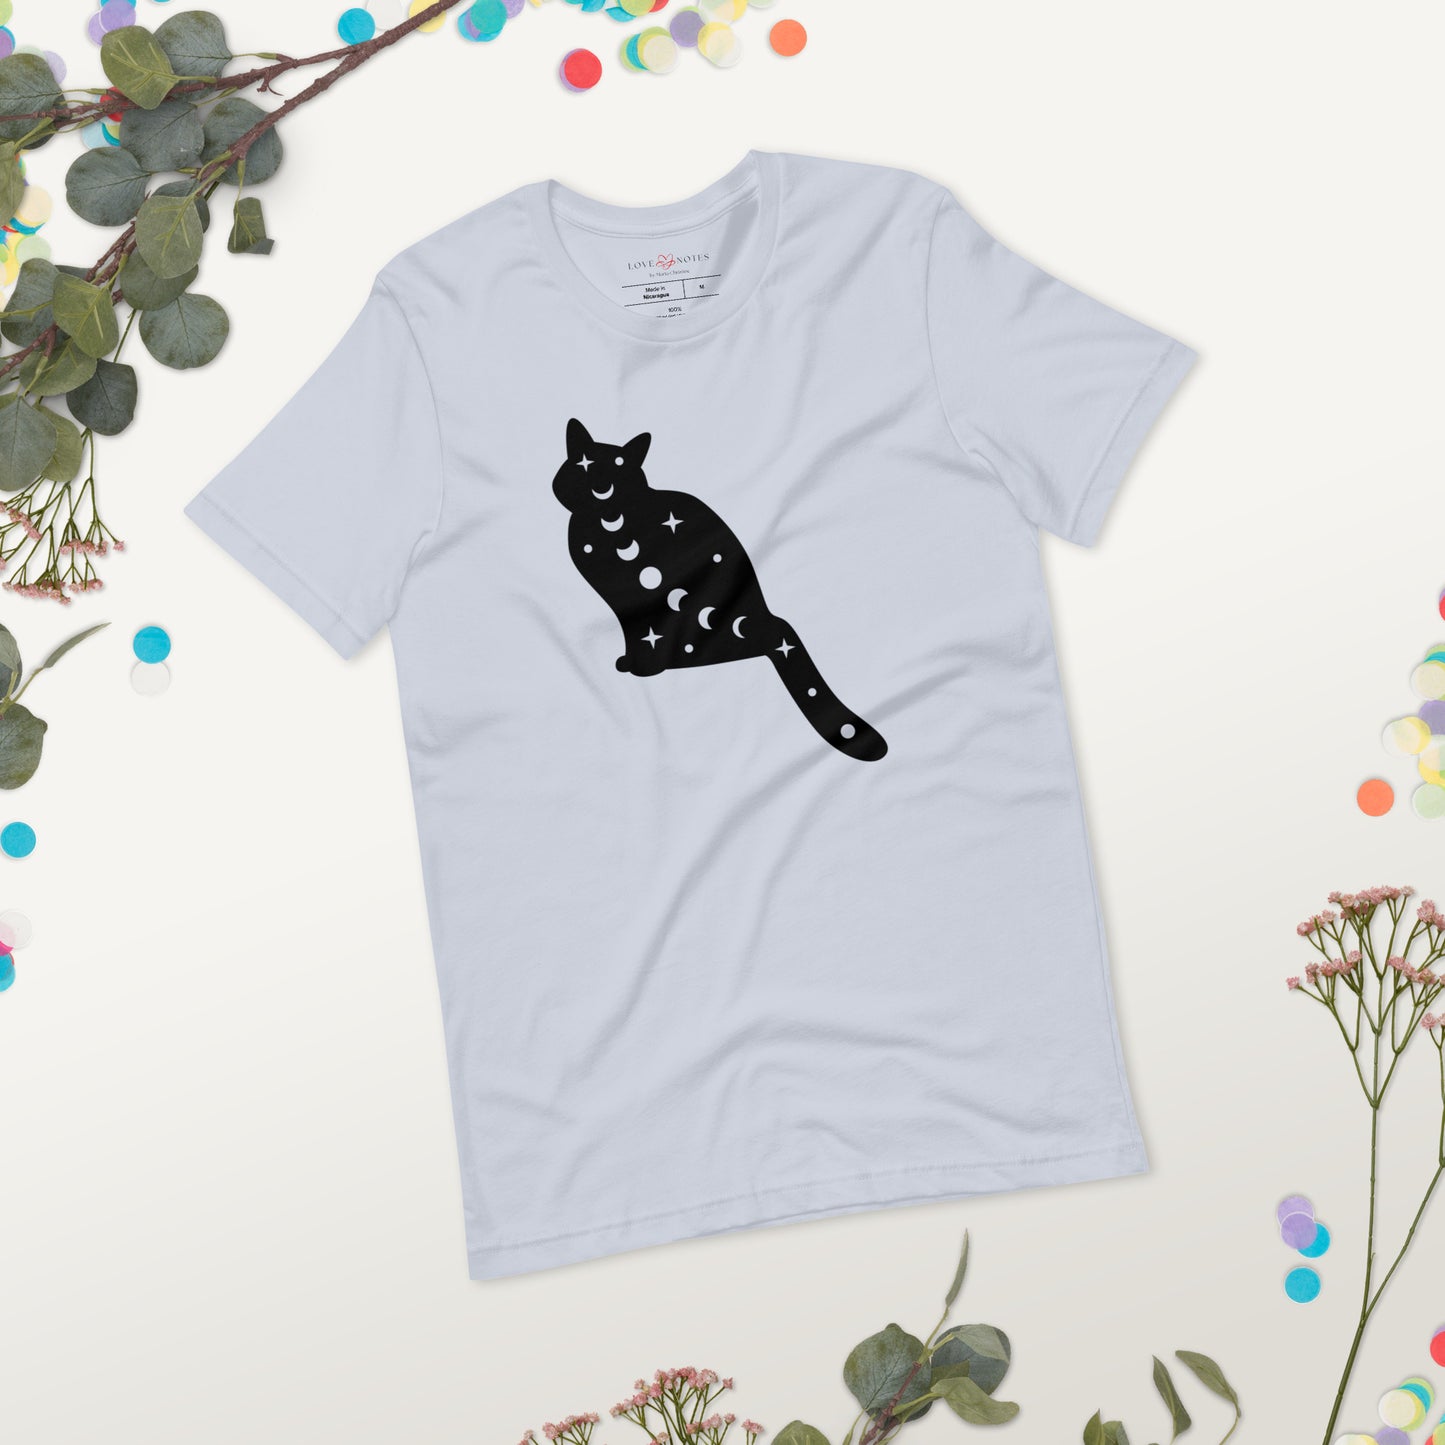 Unisex Tee: Black Cat with Moon Phases